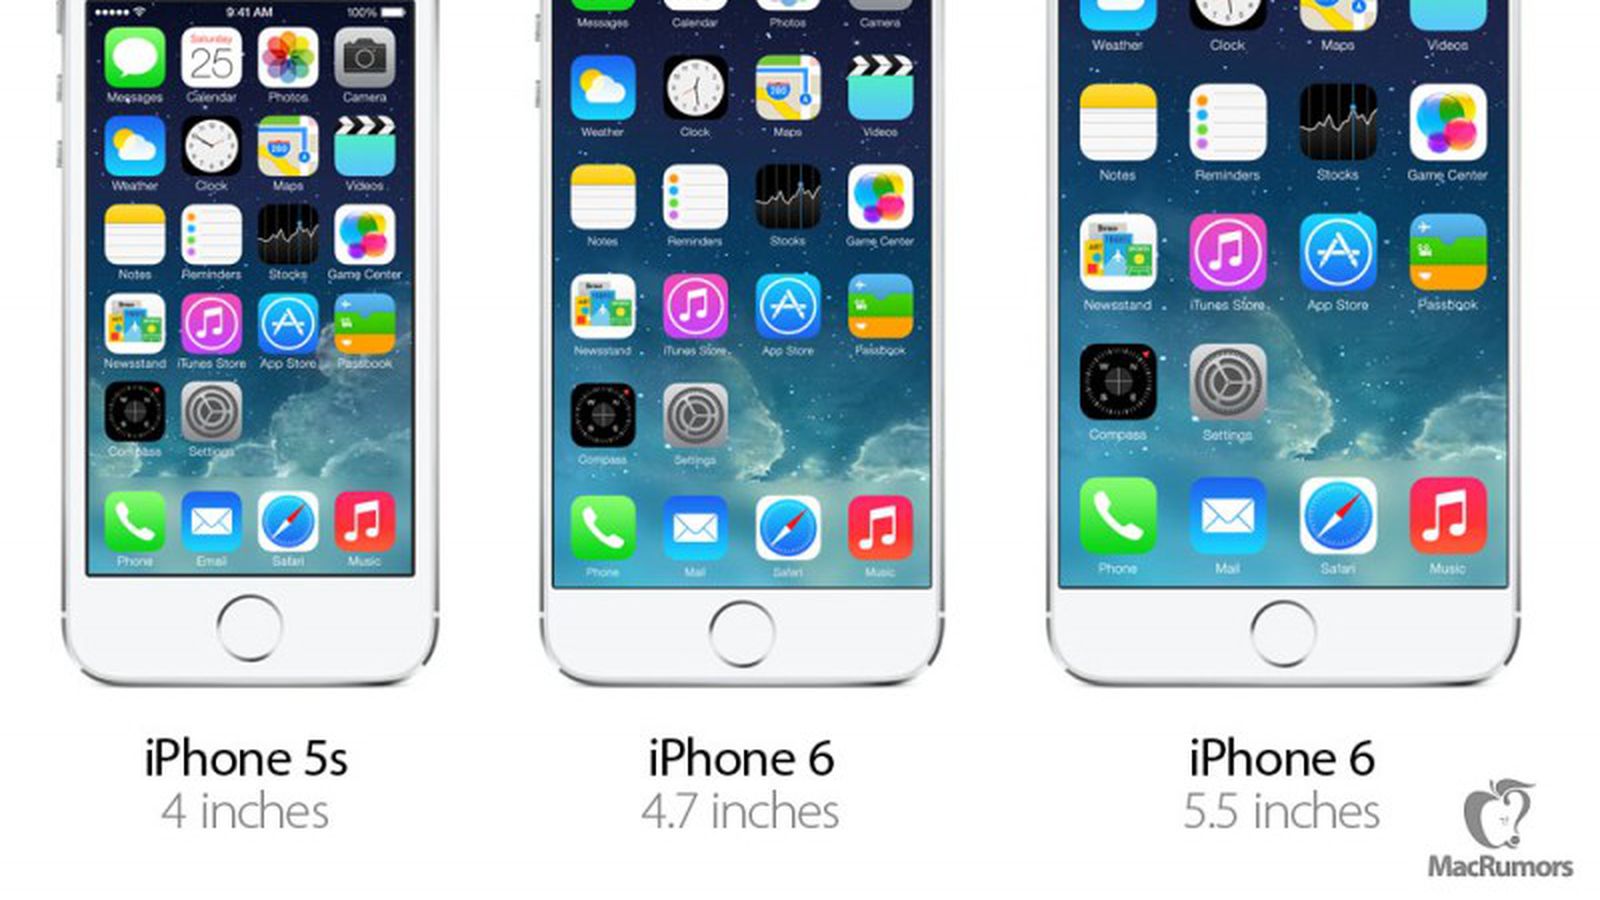 klep Heel boos bespotten Larger iPhone 6 May Cause Massive Spike in Upgrades, Lure Android Users -  MacRumors